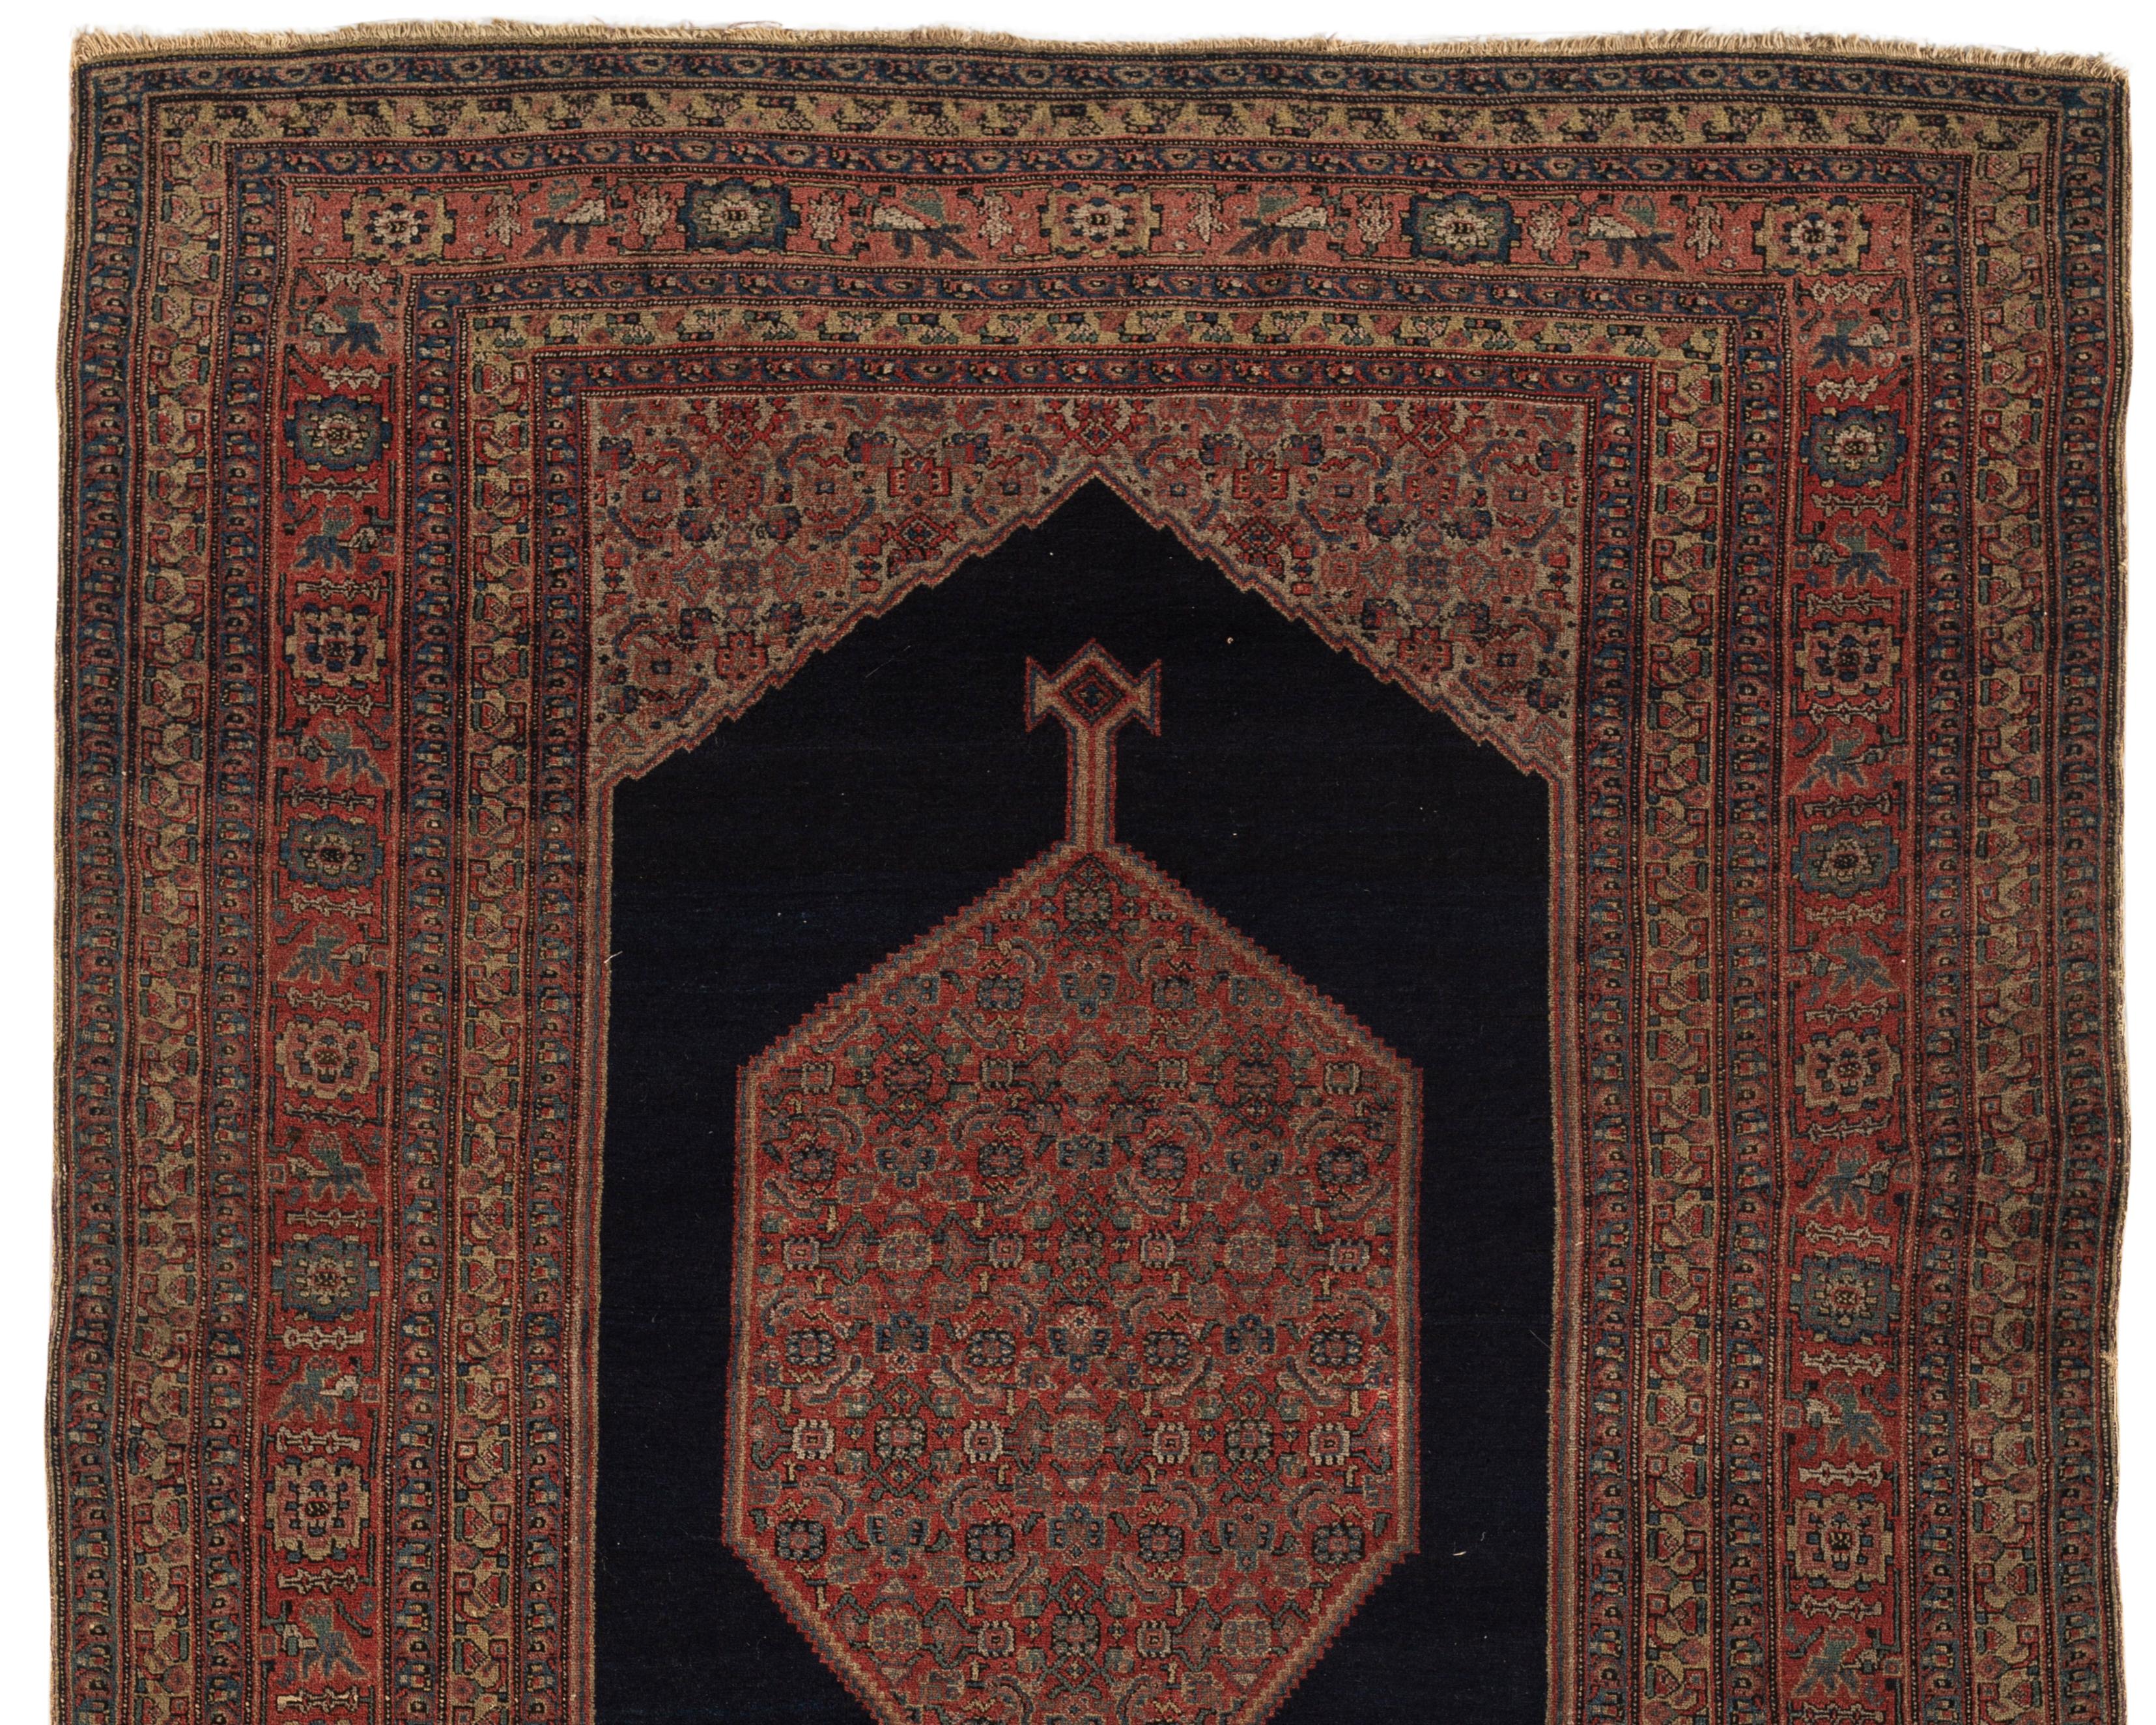 Antique Persian Senneh rug, circa 1880, size: 4'7 x 6'7. From the town of Senha (Sanandaj) in Kurdistan come antique rugs that attain nearly miraculous fineness and suppleness. A central deep navy diamond enclosing a floral design filled center